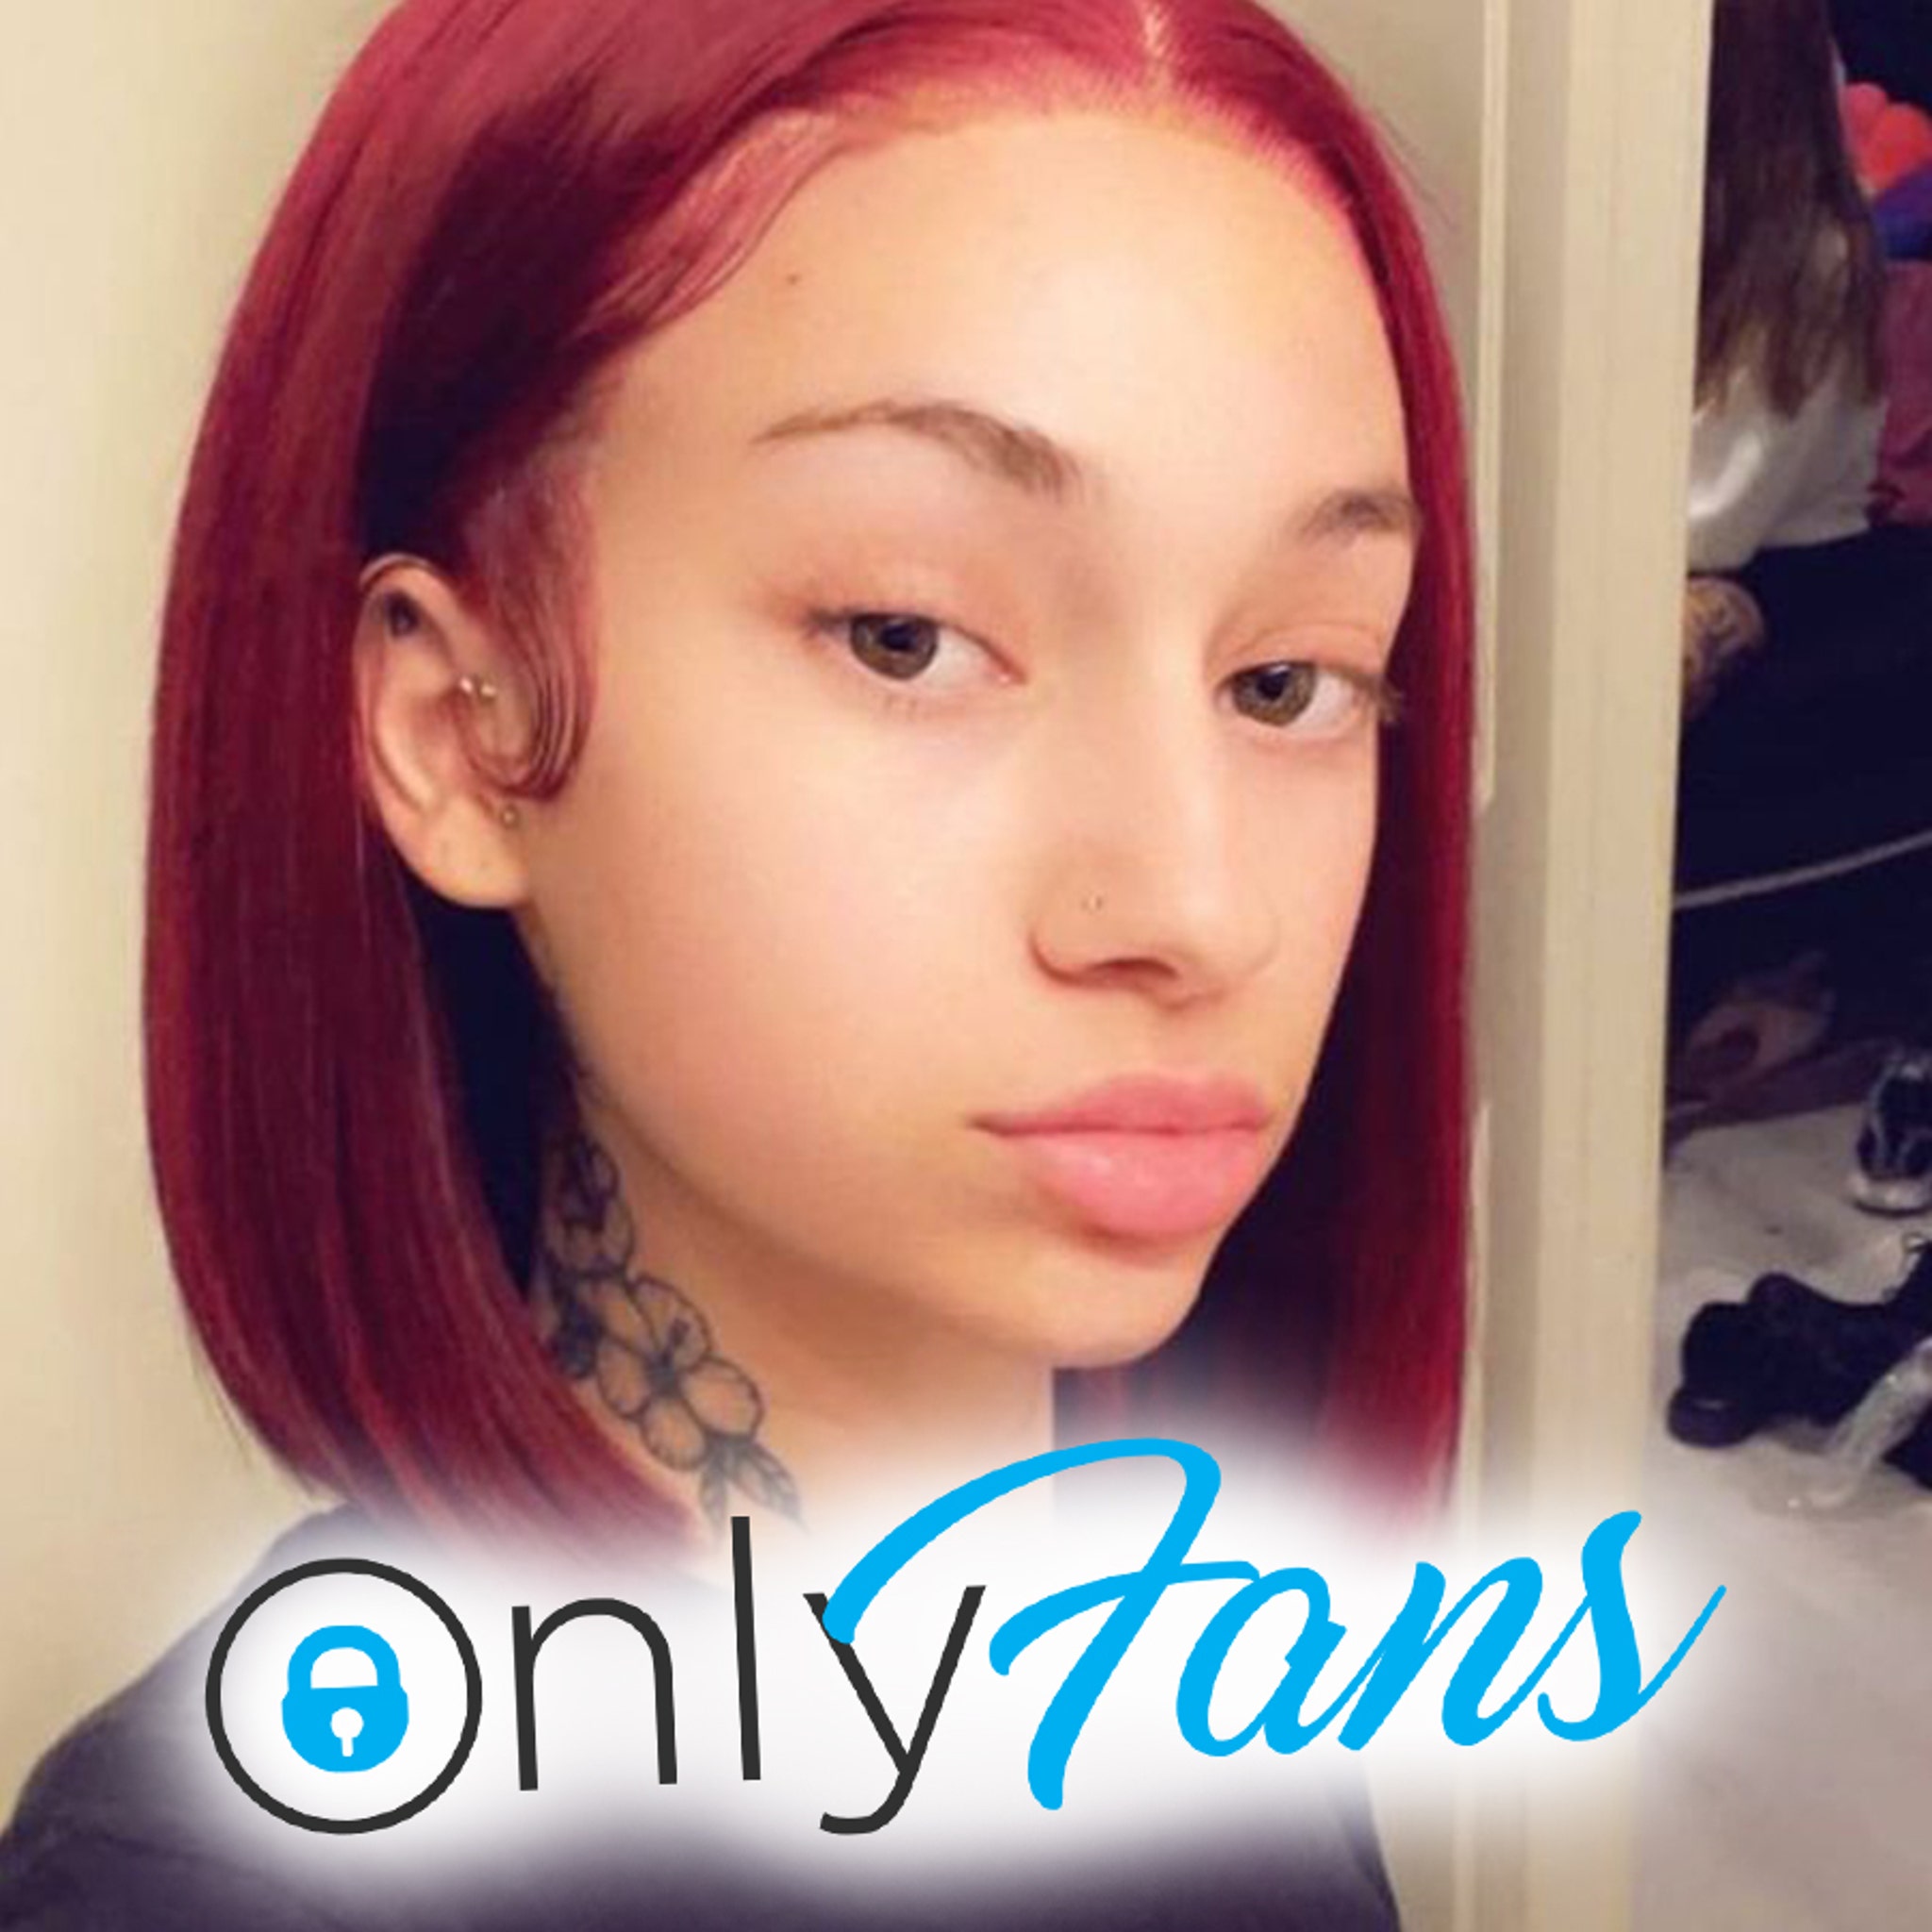 Fans bhad bhabie page only Bhad Bhabie